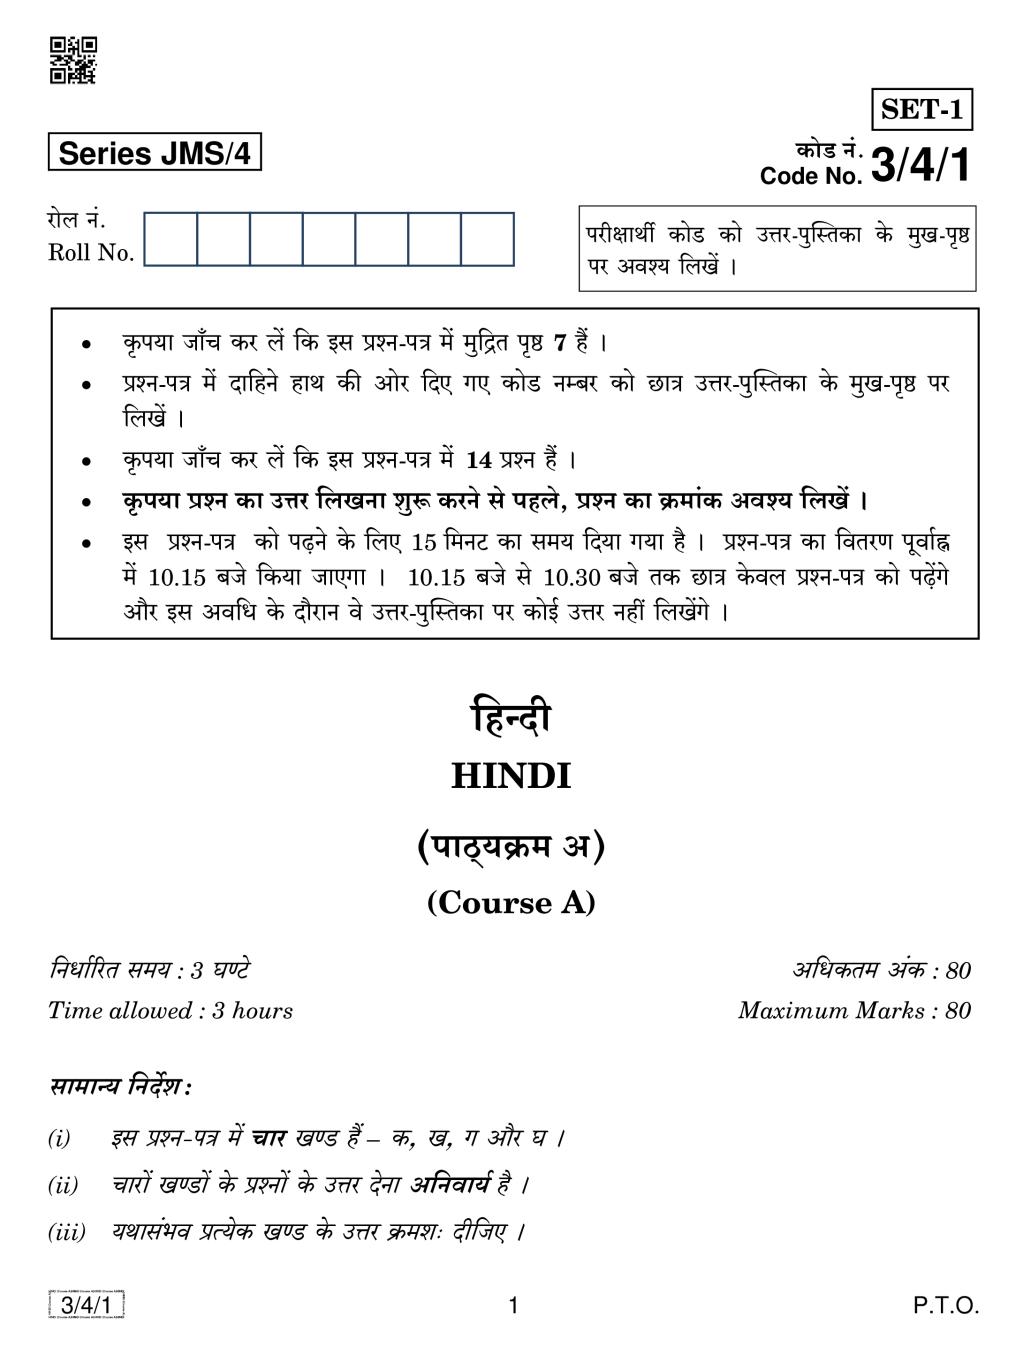 CBSE Class 10 Hindi Course A Question Paper 2019 Set 4 - Page 1